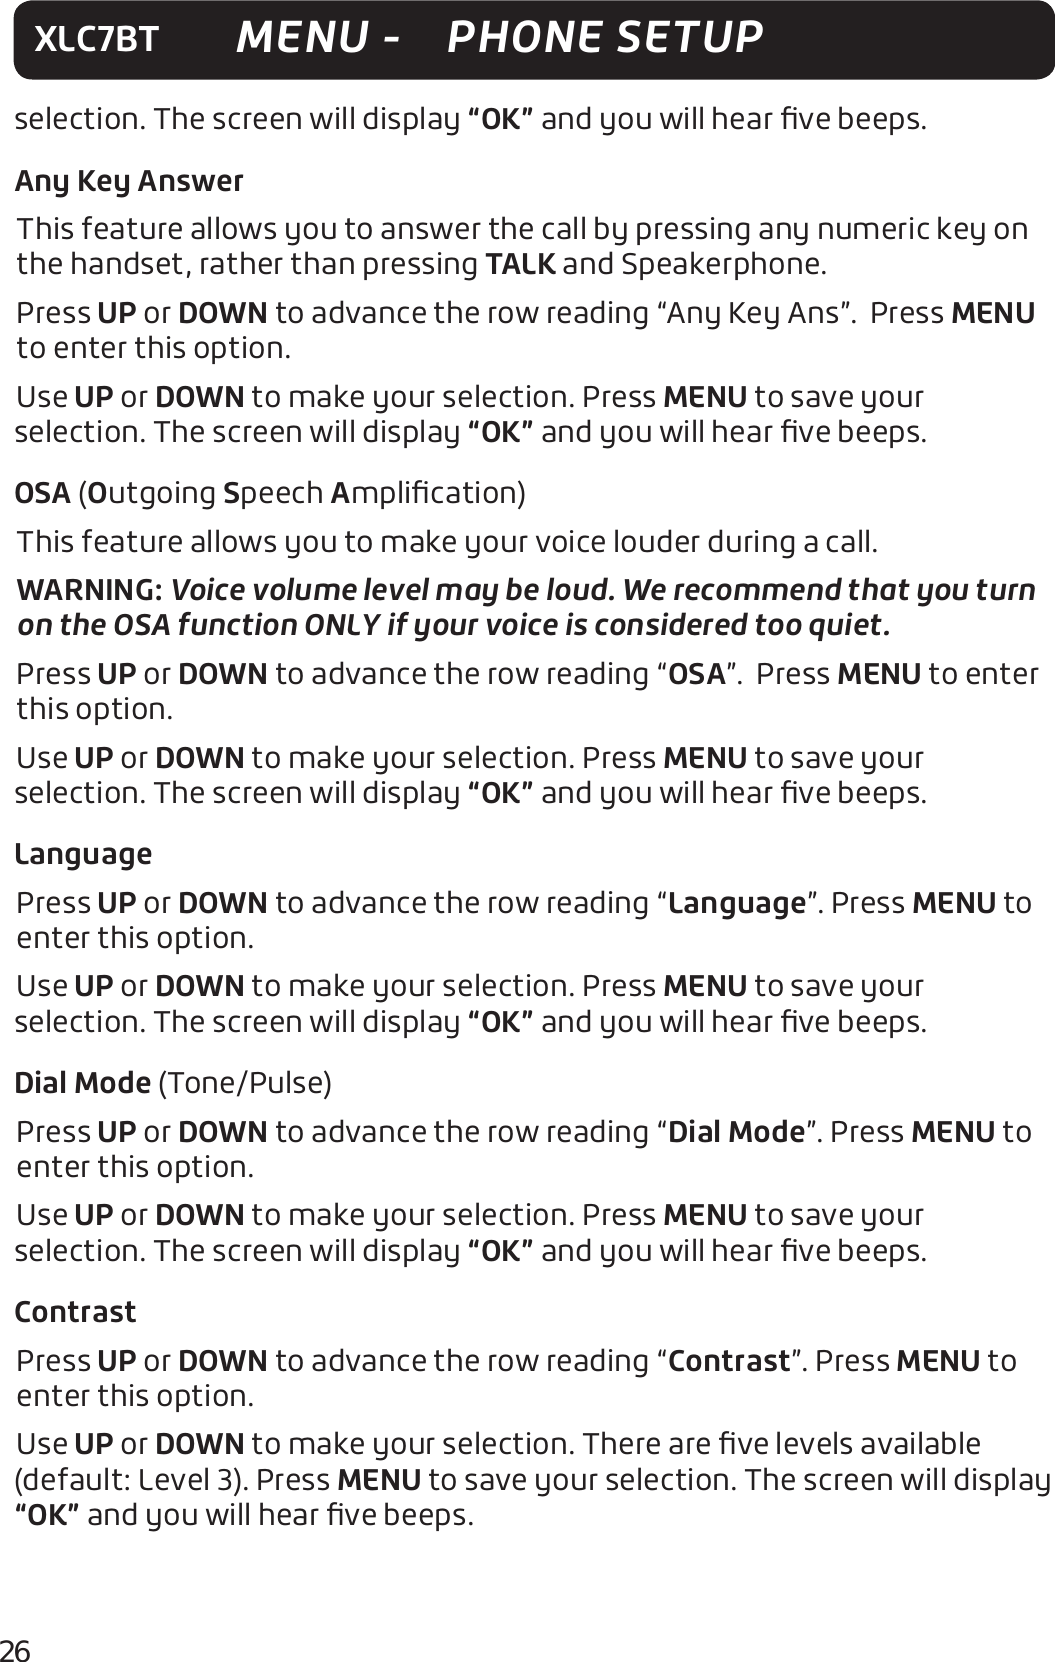 26XLC7BT MENU -   PHONE SETUPselection. The screen will display “OK” and you will hear ﬁve beeps.Any Key AnswerThis feature allows you to answer the call by pressing any numeric key on the handset, rather than pressing TALK and Speakerphone. Press UP or DOWN to advance the row reading “Any Key Ans”.  Press MENU to enter this option.Use UP or DOWN to make your selection. Press MENU to save your selection. The screen will display “OK” and you will hear ﬁve beeps.OSA (Outgoing Speech Ampliﬁcation)This feature allows you to make your voice louder during a call. WARNING: Voice volume level may be loud. We recommend that you turn on the OSA function ONLY if your voice is considered too quiet. Press UP or DOWN to advance the row reading “OSA”.  Press MENU to enter this option.Use UP or DOWN to make your selection. Press MENU to save your selection. The screen will display “OK” and you will hear ﬁve beeps.LanguagePress UP or DOWN to advance the row reading “Language”. Press MENU to enter this option.Use UP or DOWN to make your selection. Press MENU to save your selection. The screen will display “OK” and you will hear ﬁve beeps. Dial Mode (Tone/Pulse)Press UP or DOWN to advance the row reading “Dial Mode”. Press MENU to enter this option.Use UP or DOWN to make your selection. Press MENU to save your selection. The screen will display “OK” and you will hear ﬁve beeps.ContrastPress UP or DOWN to advance the row reading “Contrast”. Press MENU to enter this option.Use UP or DOWN to make your selection. There are ﬁve levels available (default: Level 3). Press MENU to save your selection. The screen will display “OK” and you will hear ﬁve beeps.